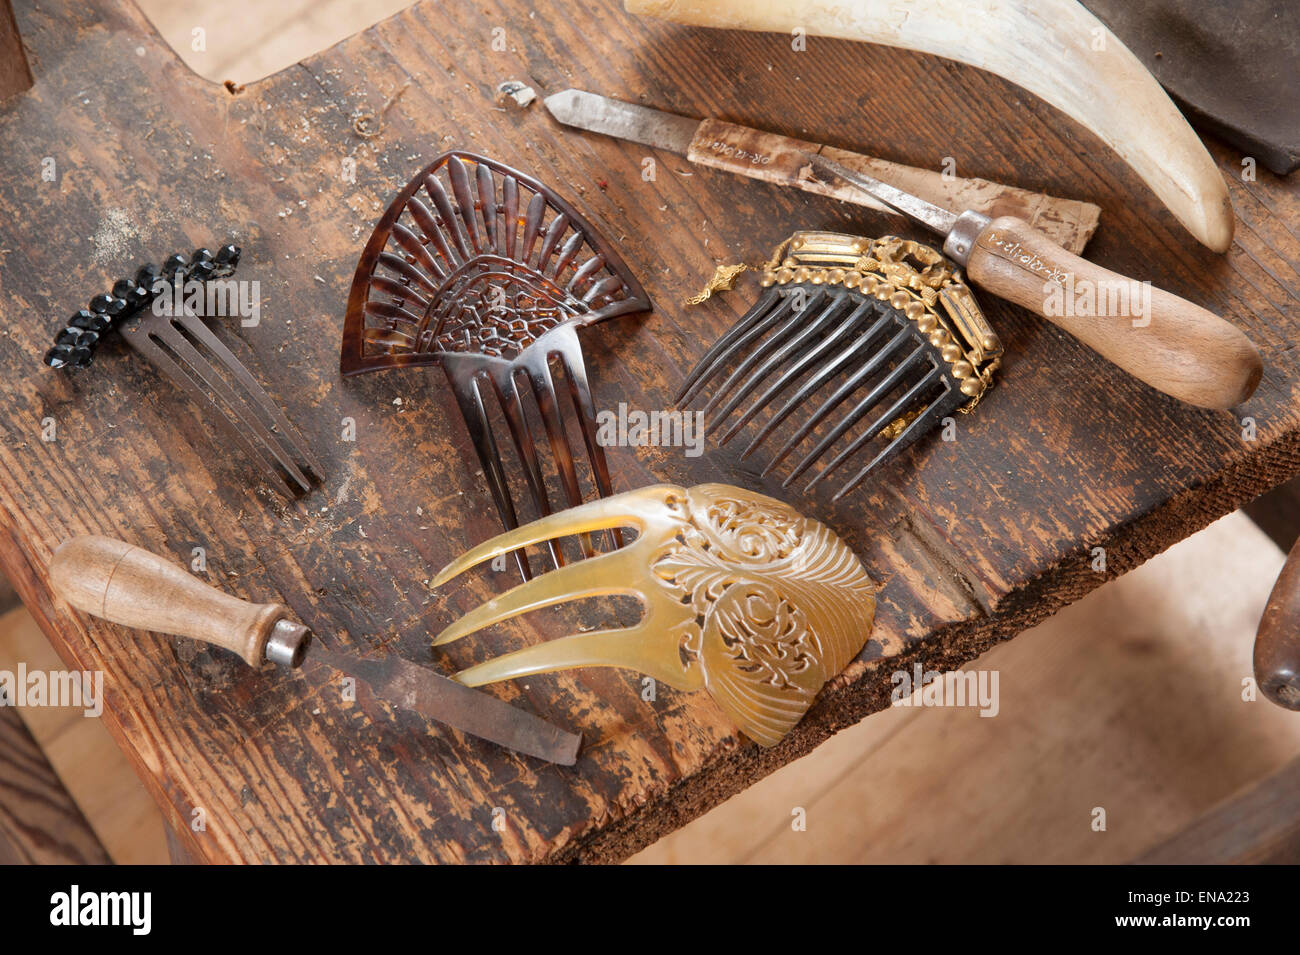 omb makers Exhibition at Museum Ober-Ramstadt, Hesse, Germany Stock Photo